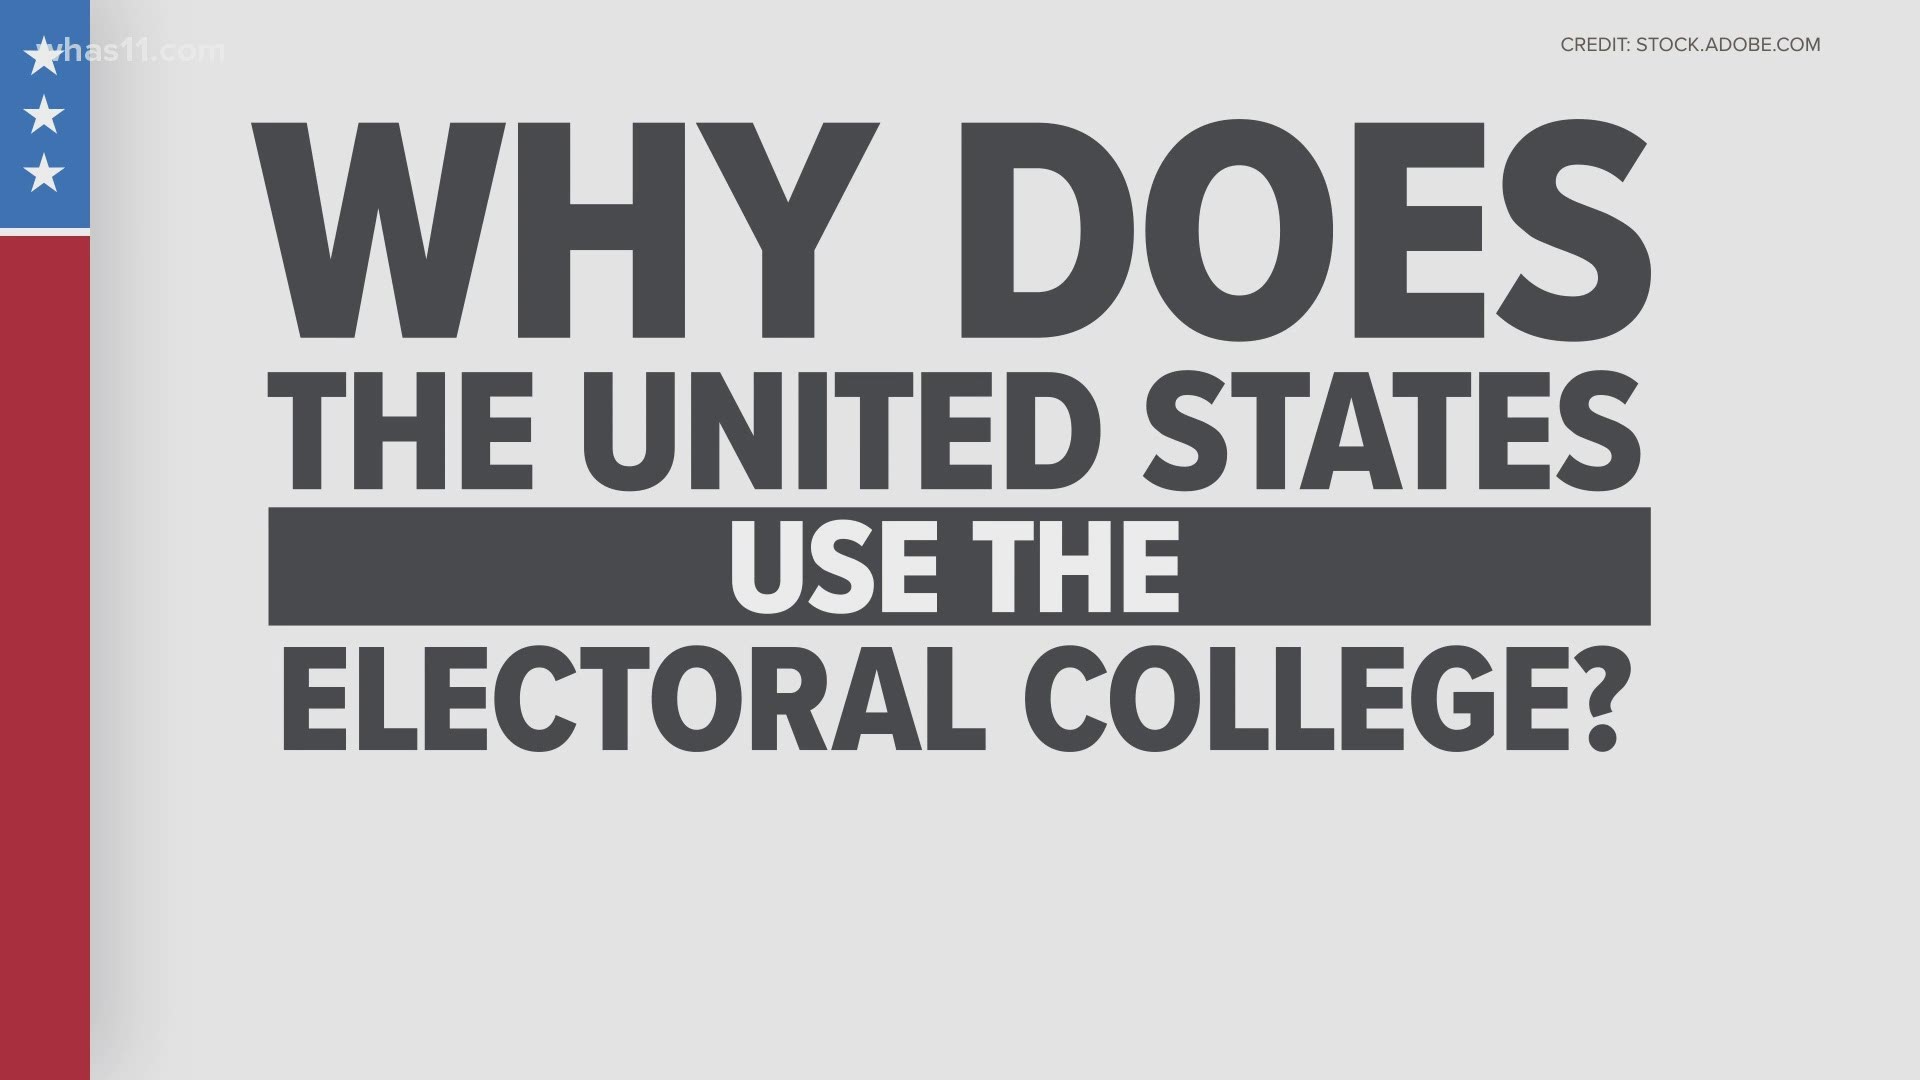 The spotlight on the Electoral College is even greater this year because Trump has refused to concede and continued to make baseless allegations of fraud.